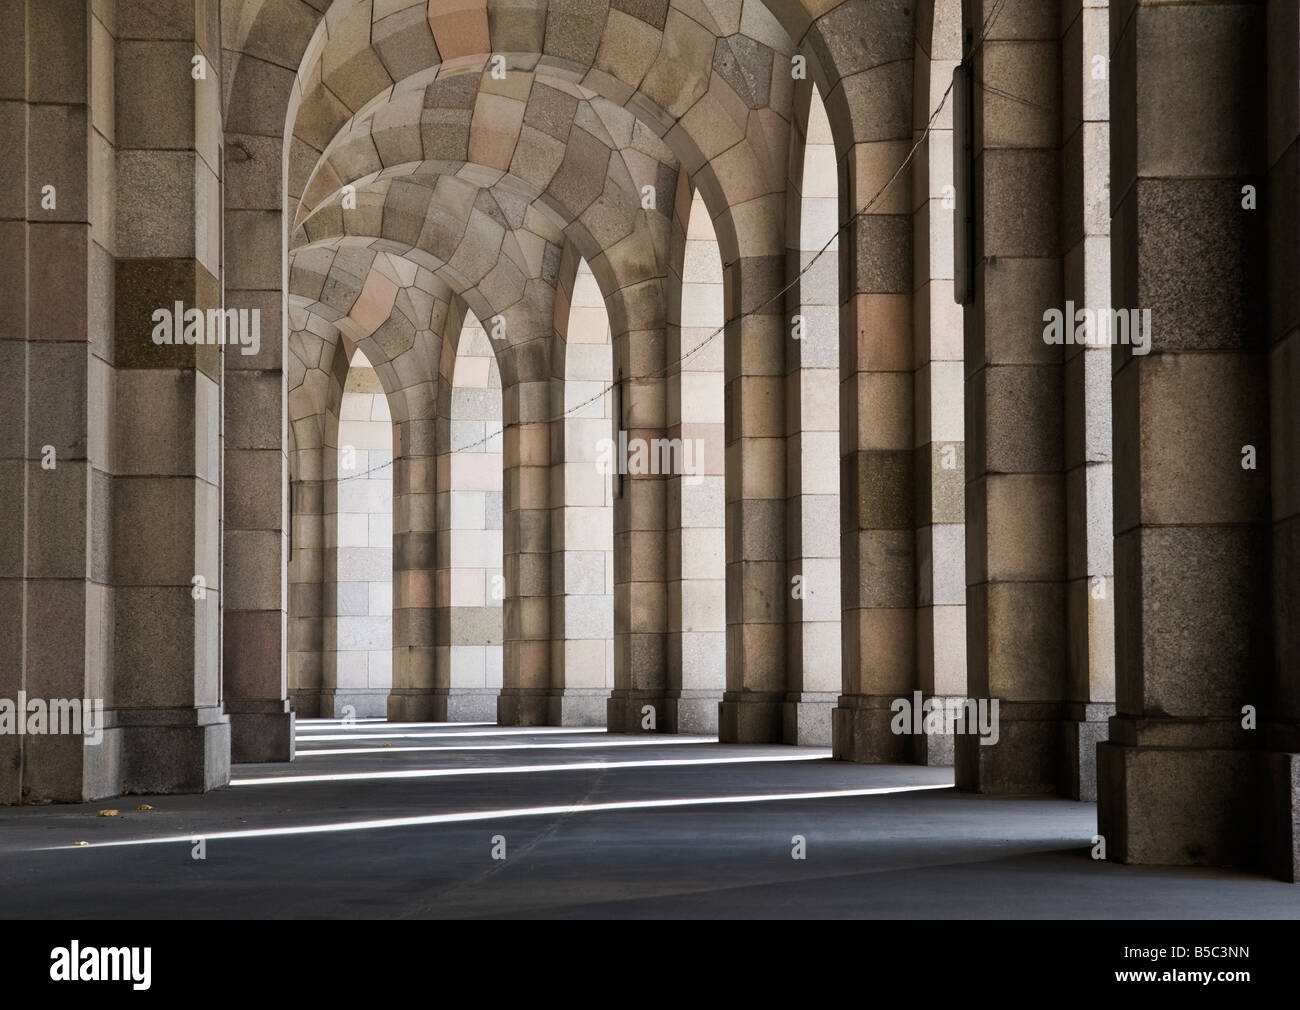 Arcade walkway at the Congress Hall at the old nazi party rally grounds Nuremberg, Germany Stock Photo